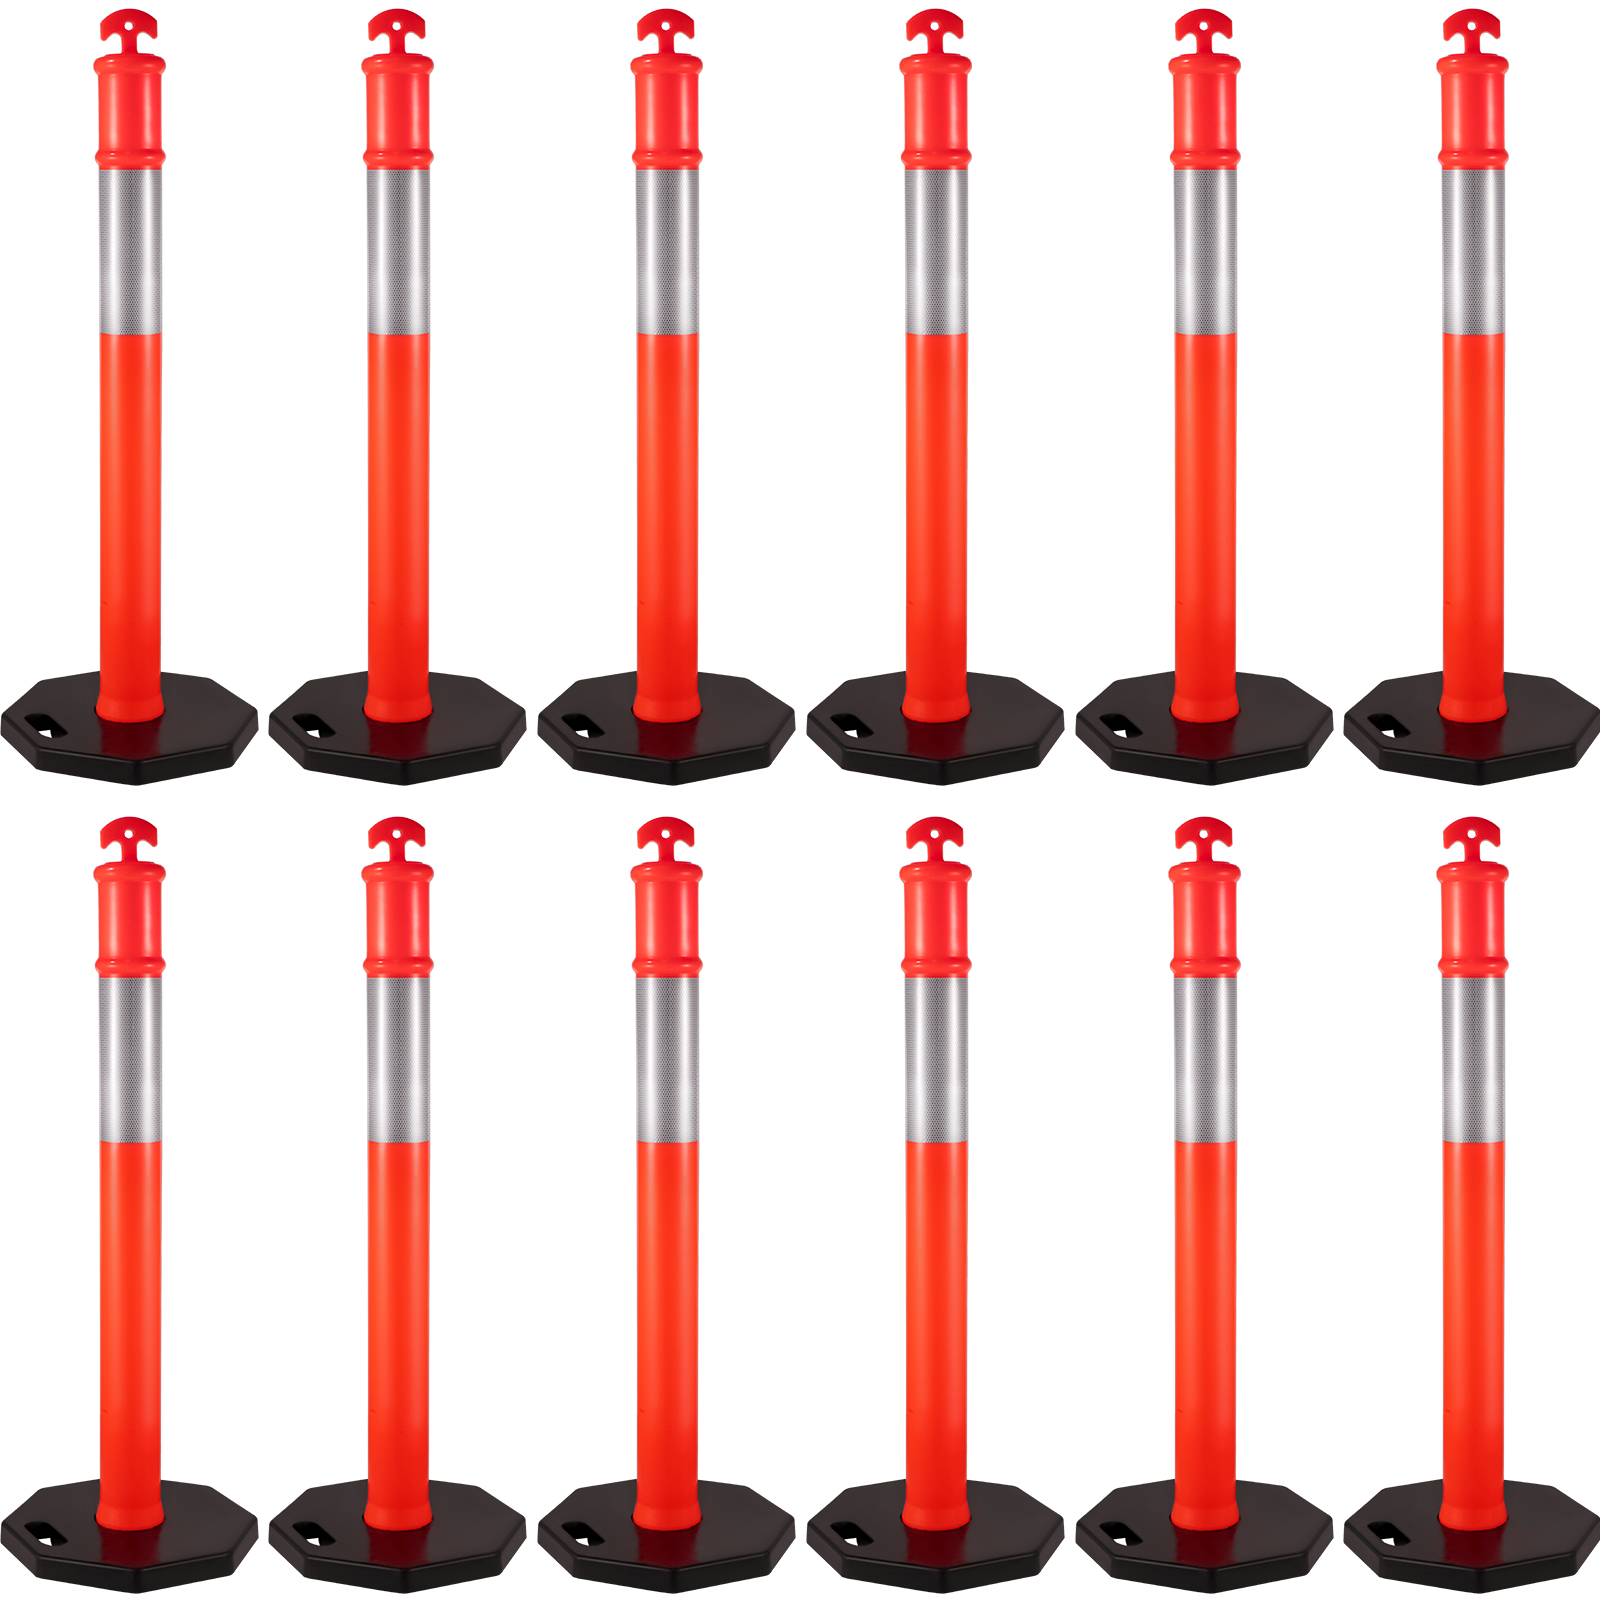 Traffic Safety Post 44" Delineator Cones/Posts Pack of 12 Posts, with 11lb Base от Vevor Many GEOs